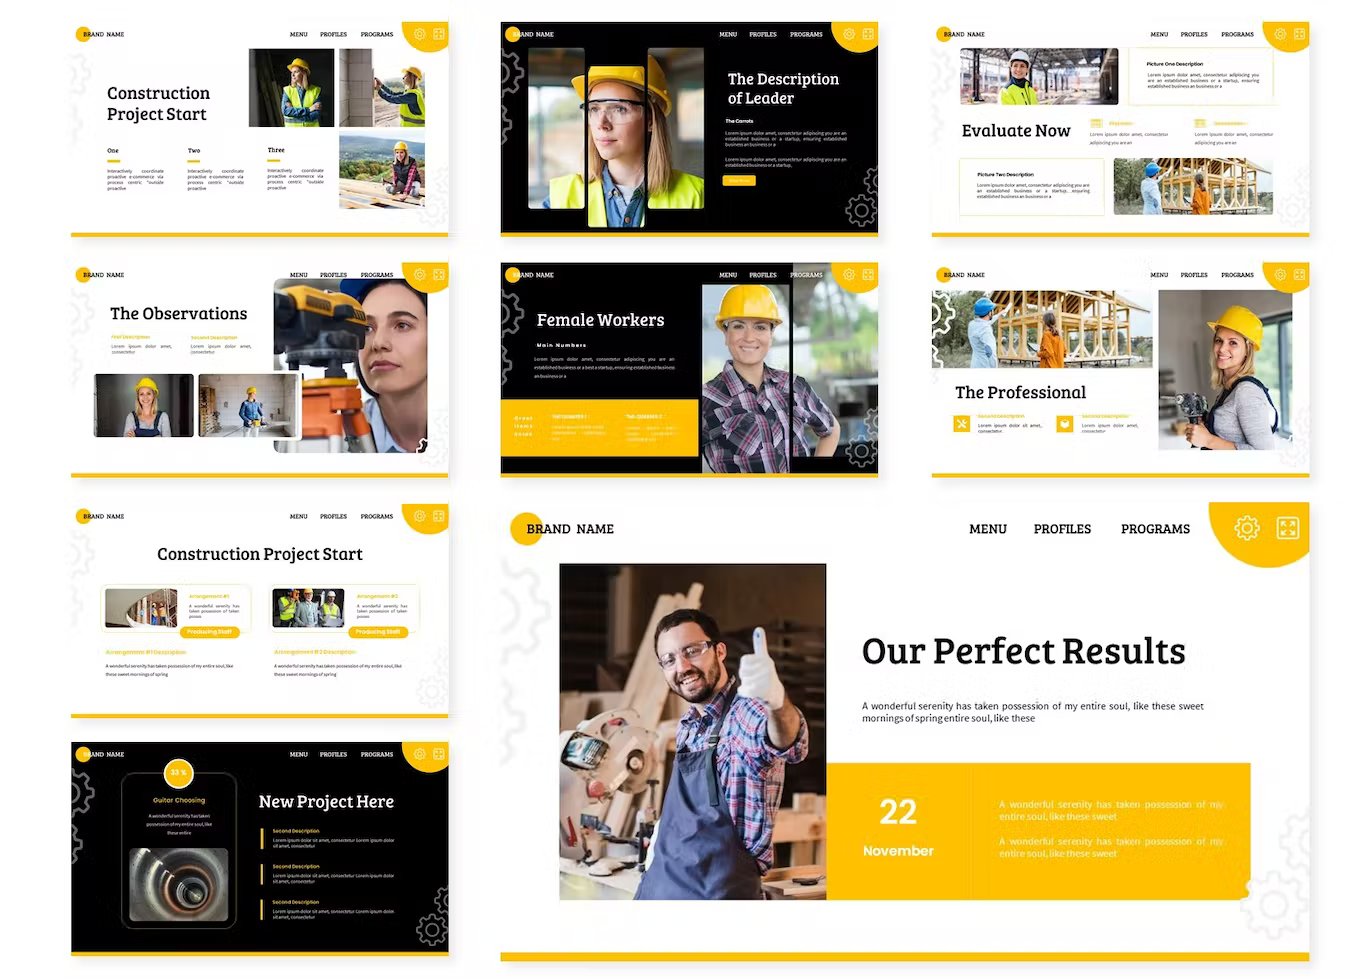 A set of 9 different project to construct presentation templates in white, yellow and black on a white background.